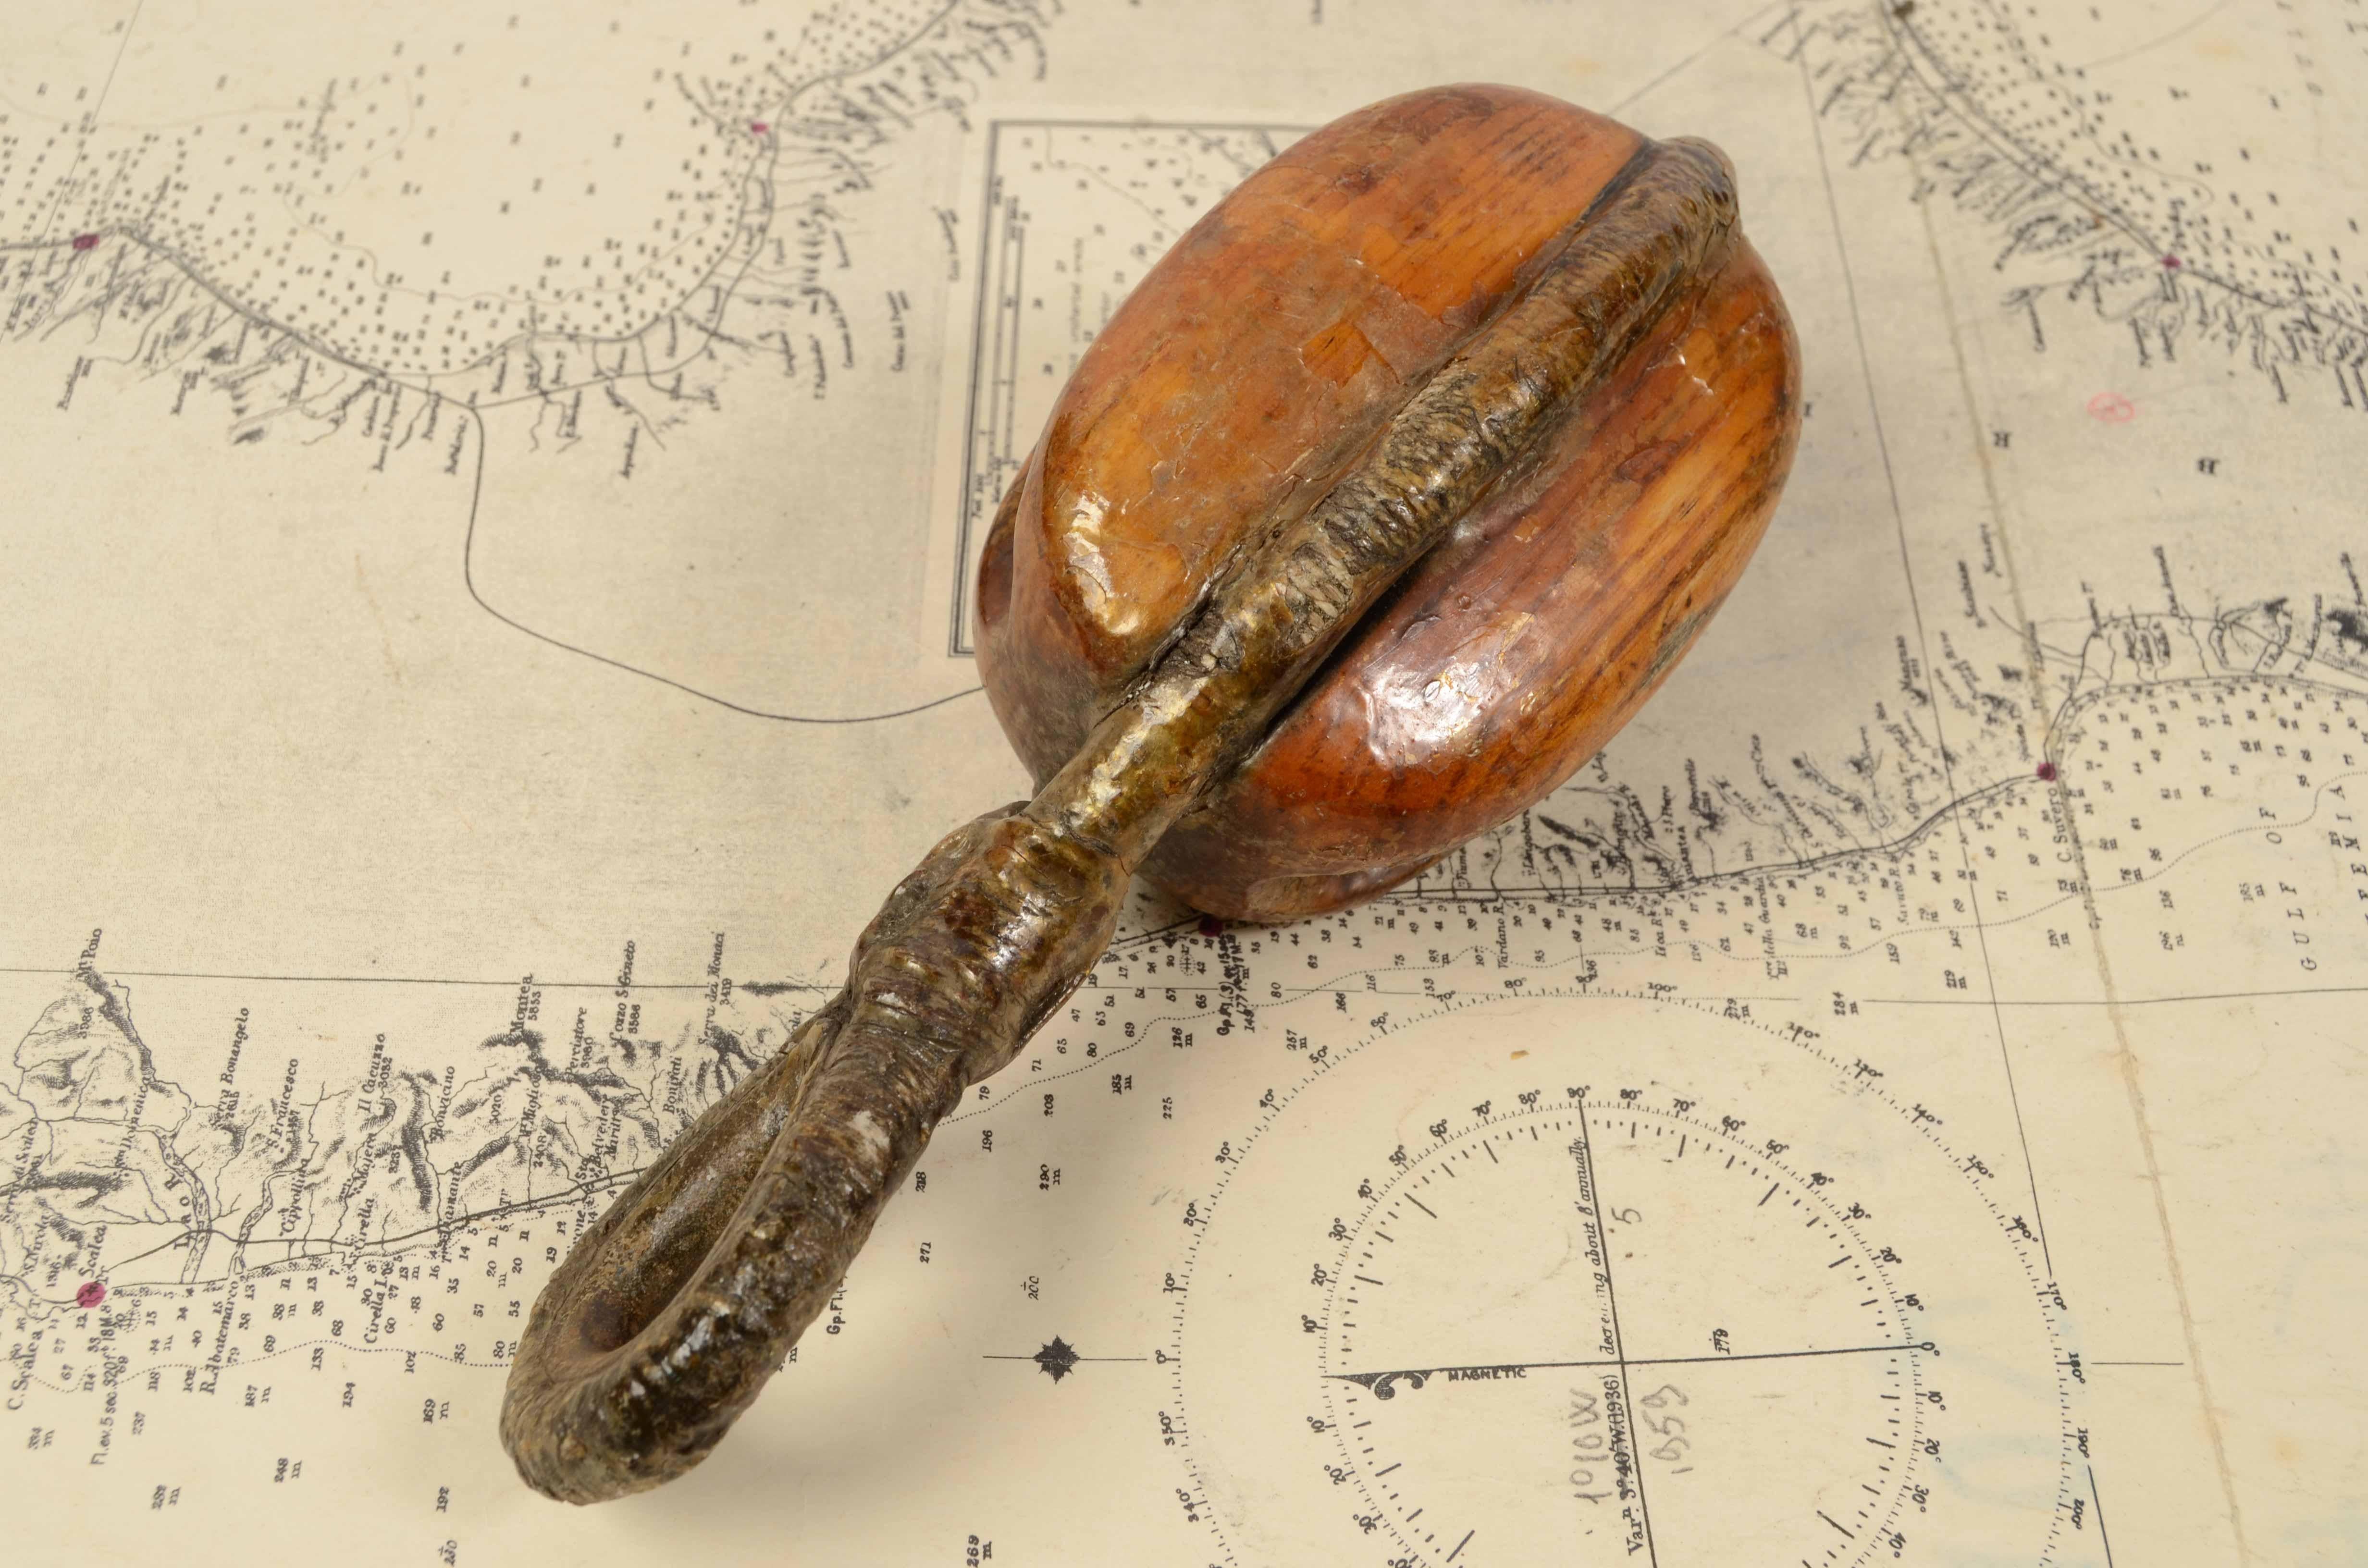 Simple block made of wood and iron with metal pulley, ovoid hardwood box with two cavities, in which both the pulley and the metal band are pivoted. English manufacture of the mid-19th century good condition. Measures: 7,5 x 7 x 22 cm – 3 x 2.8 x